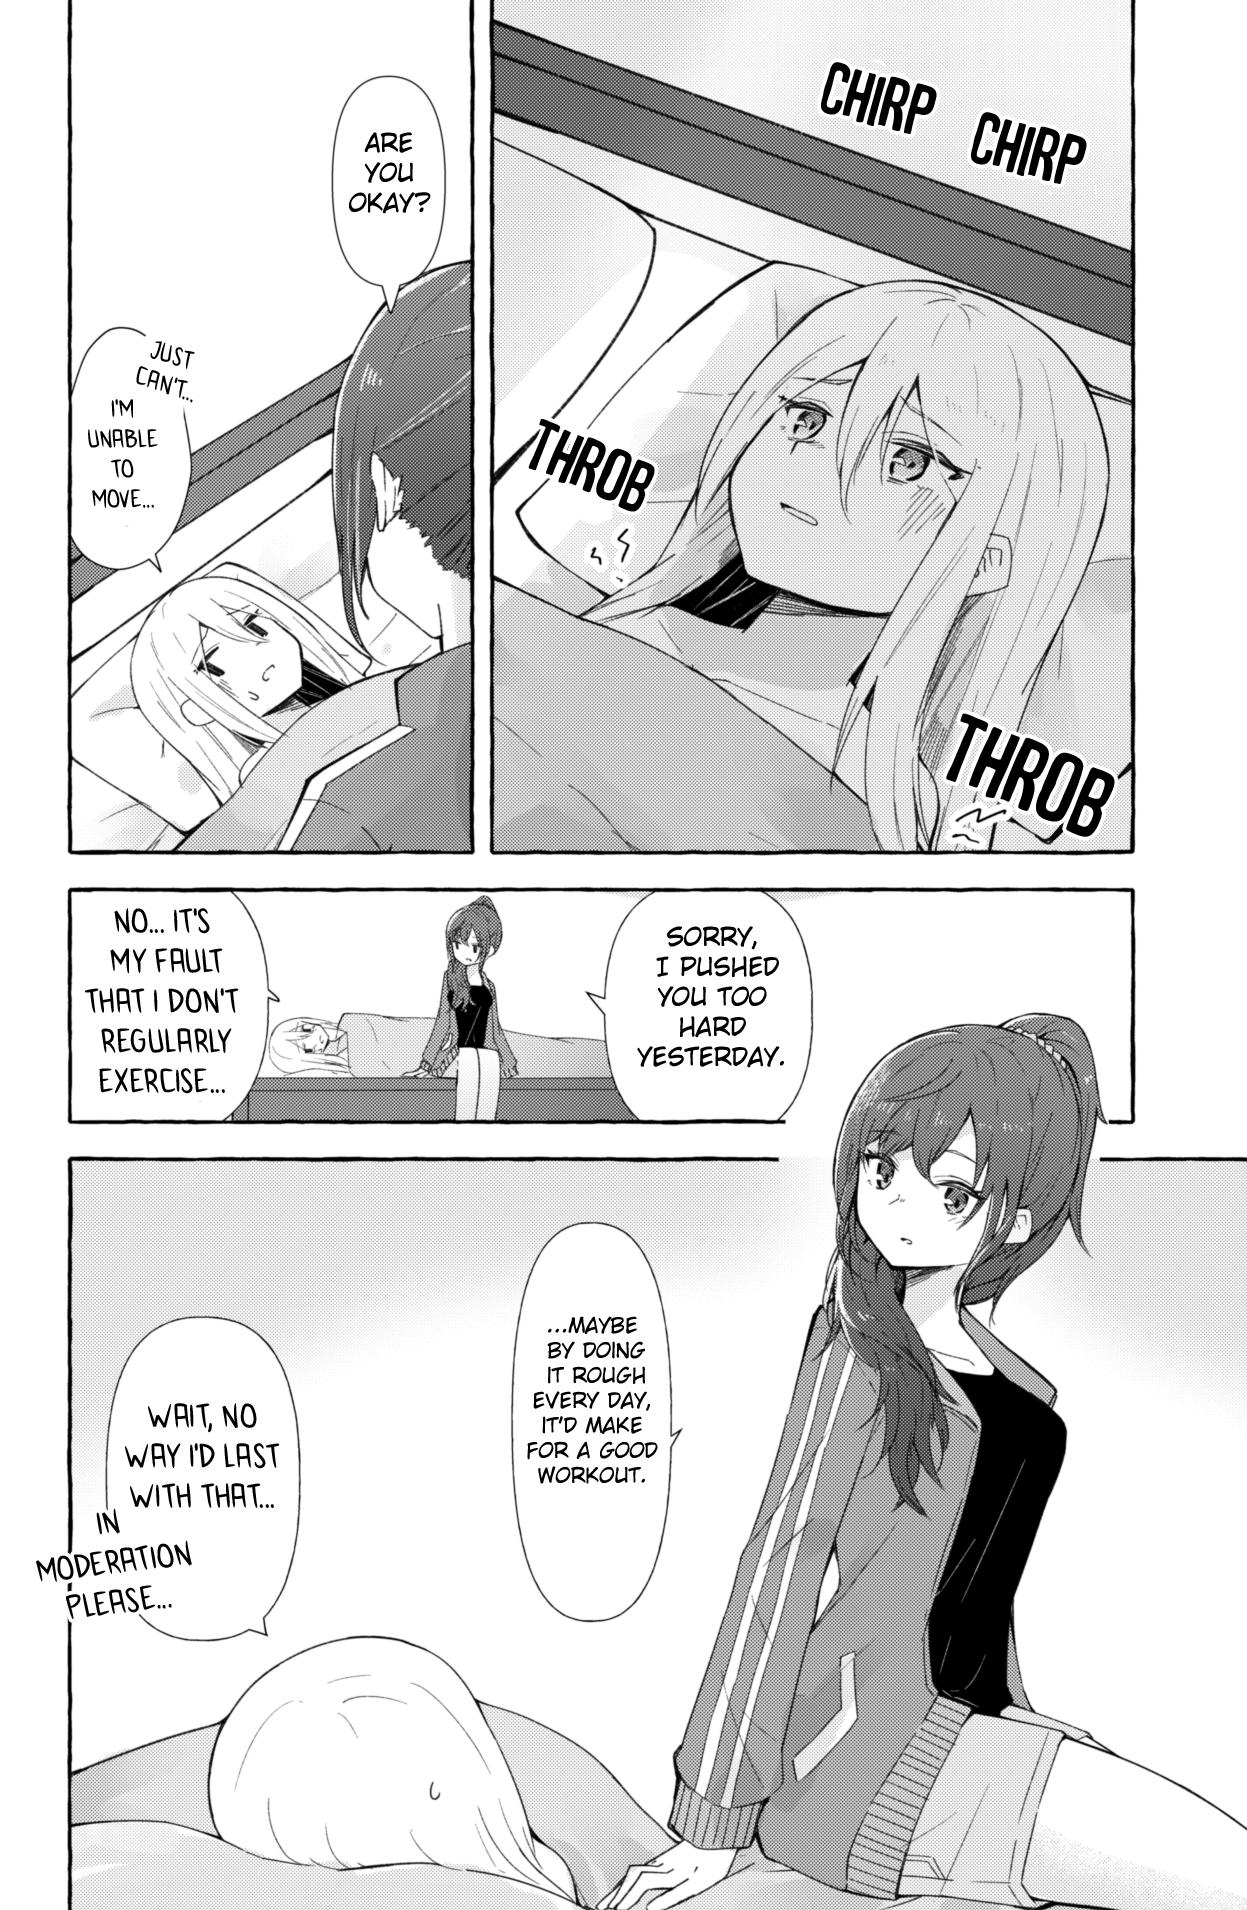 Small Boobs A Manga Where Mafuyu And Kanade Just Do The Lewds Project